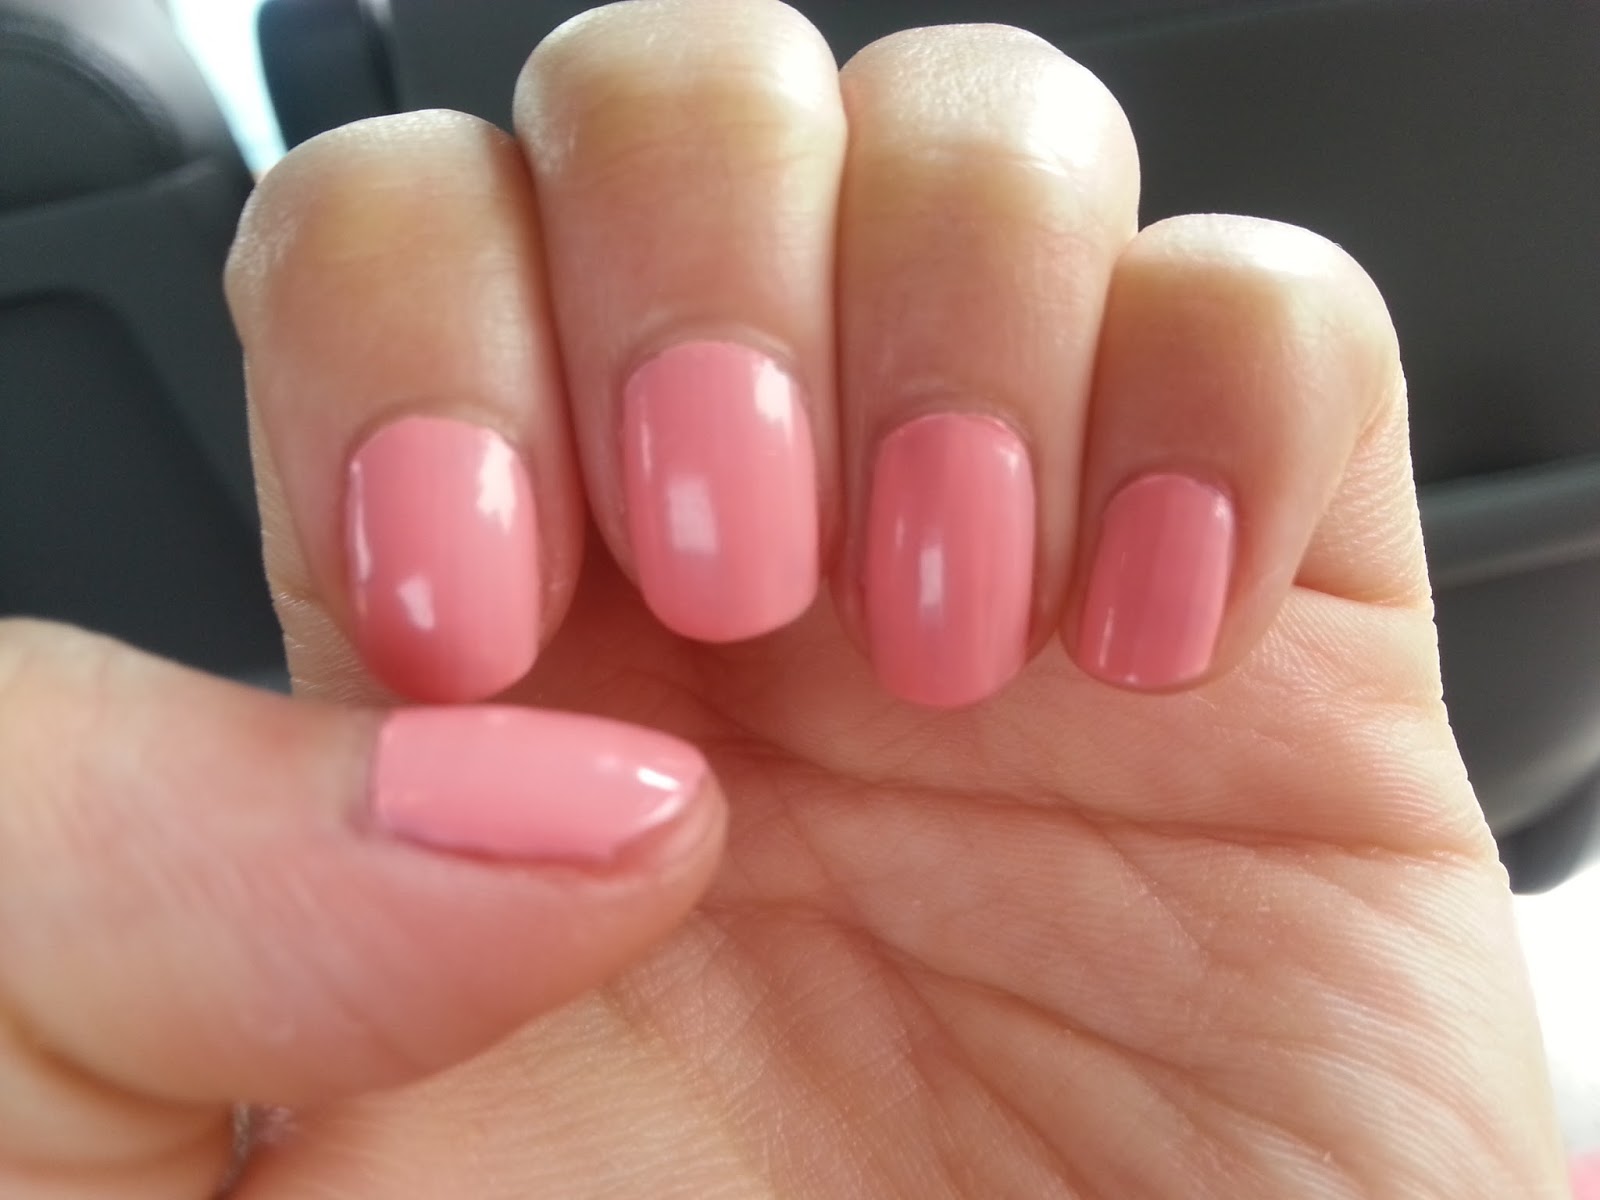 9. Orly Nail Lacquer in "Cotton Candy" - wide 2